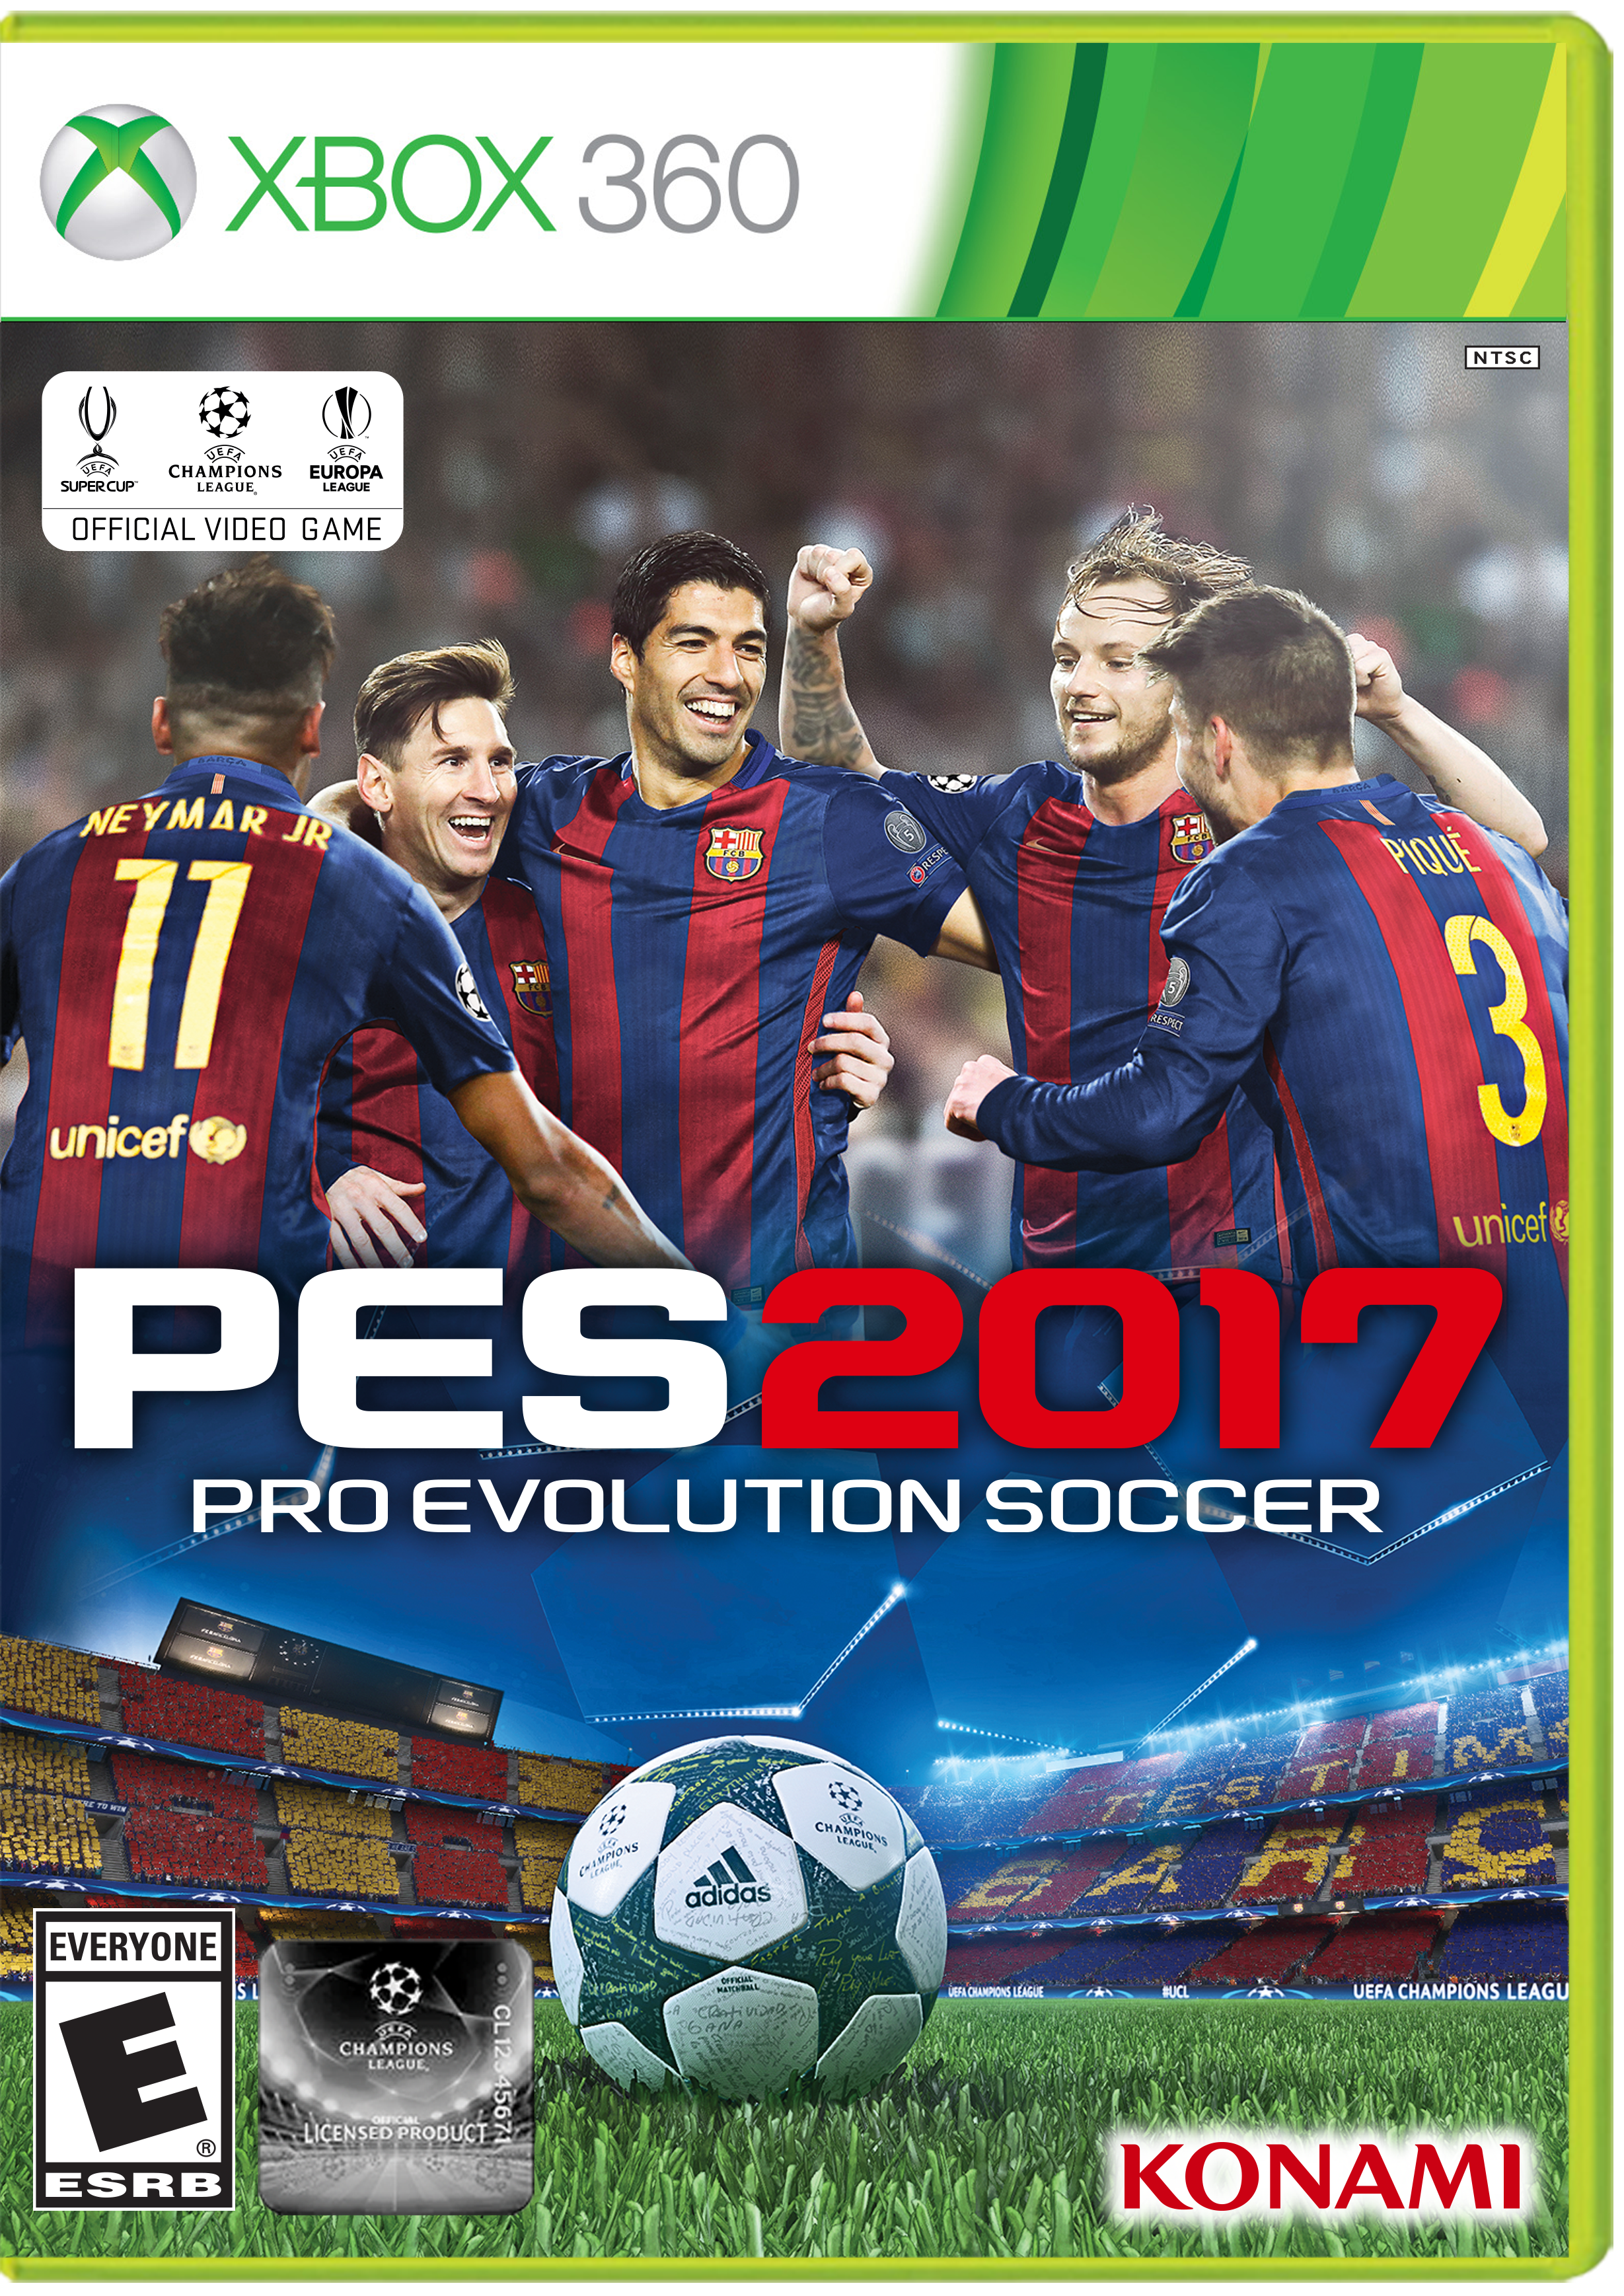 Pro Evolution Soccer 2016 Day 1 Edition (Xbox One)